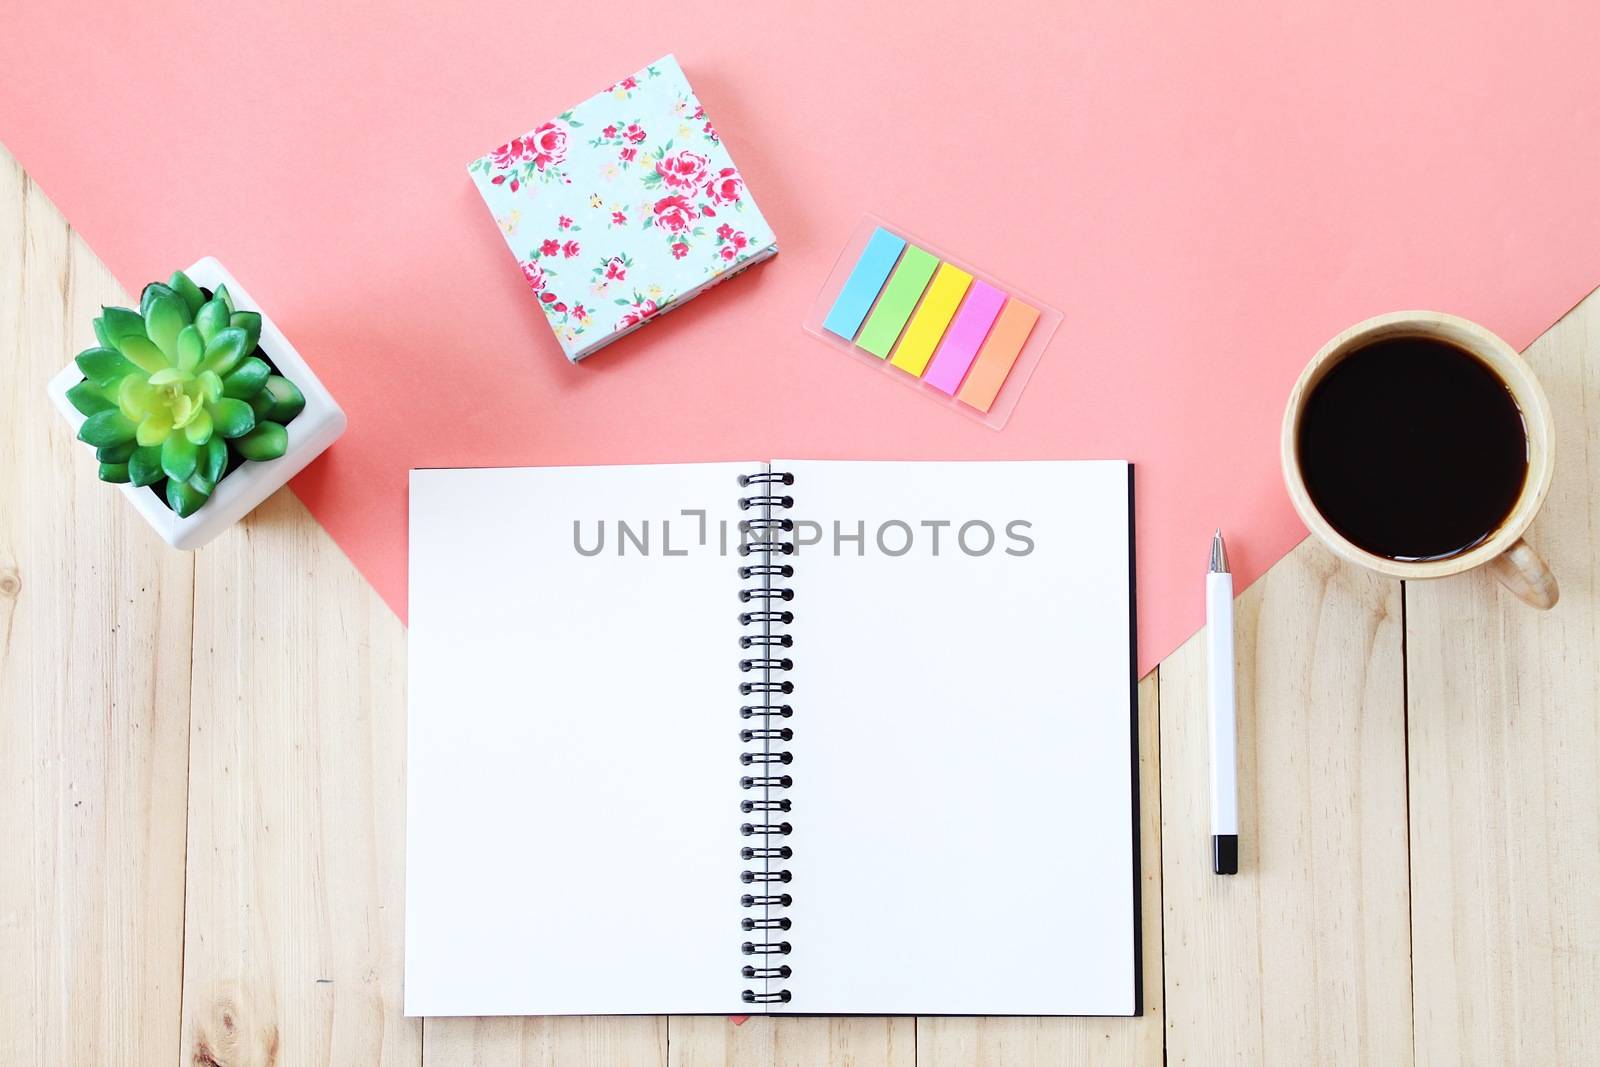 Still life, business, office supplies or education concept : Top view image of open notebook with blank pages, accessories and coffee cup on wooden background, ready for adding or mock up